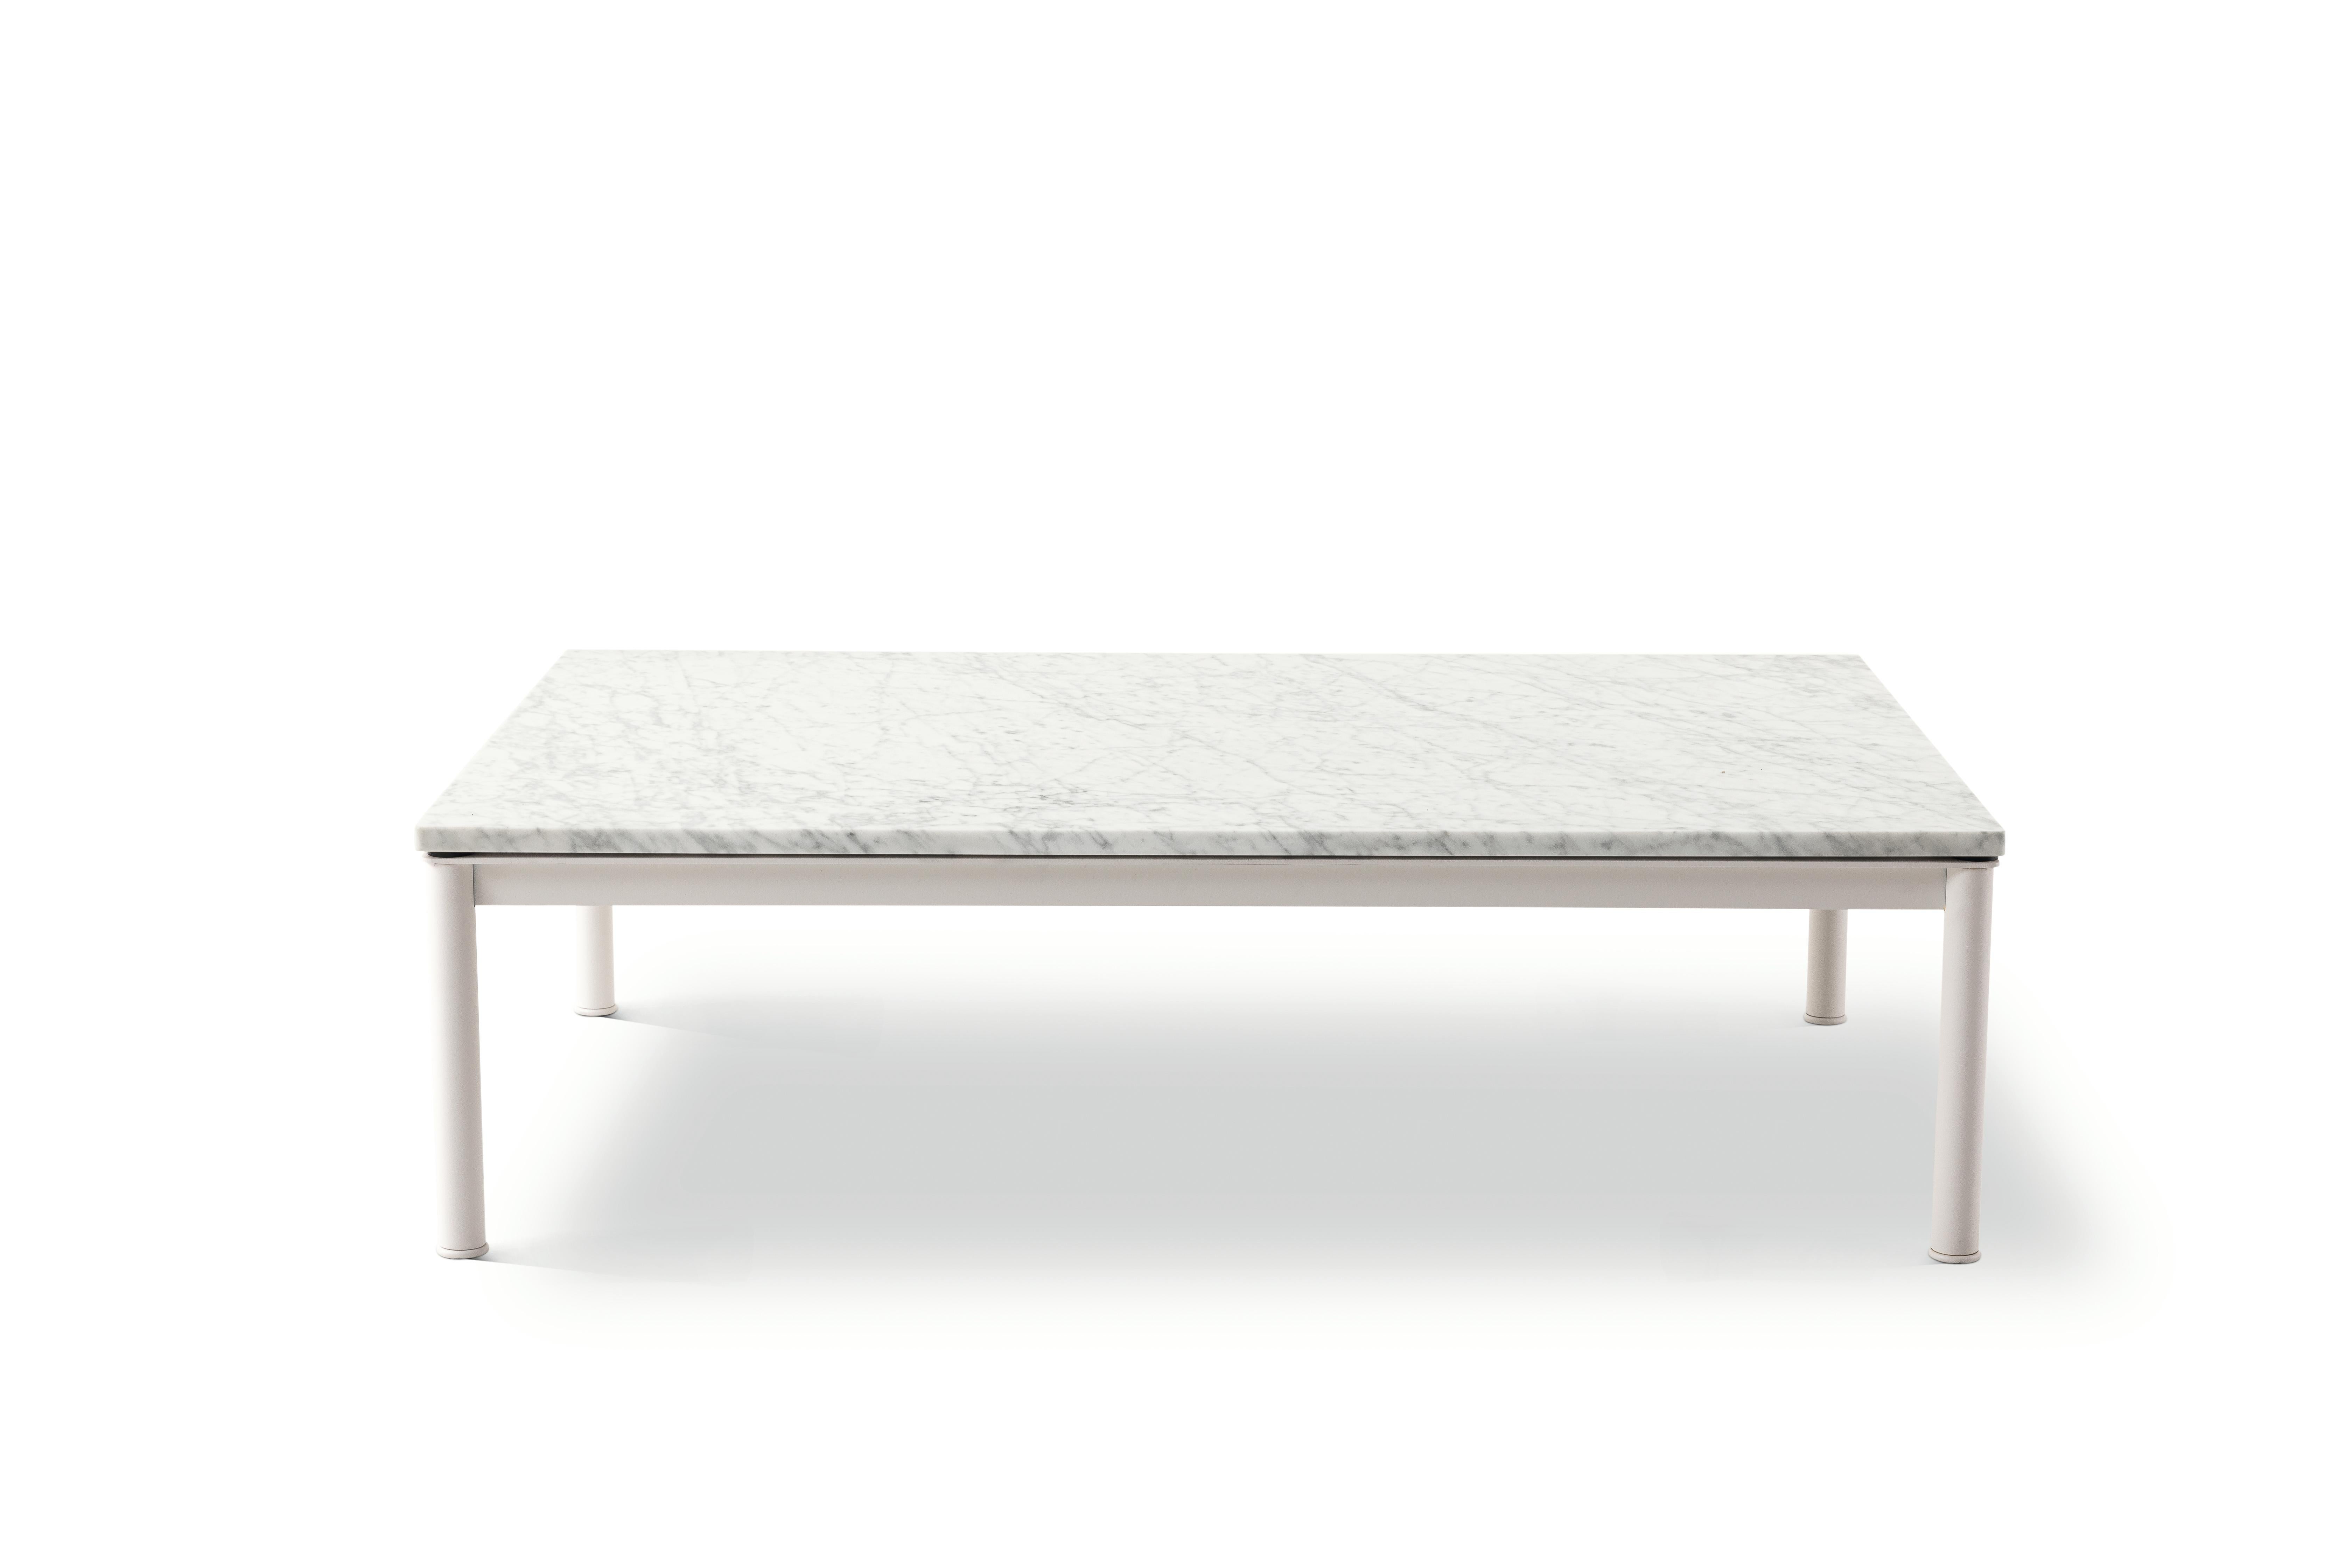 Contemporary Le Corbusier, Pierre Jeanneret, Charlotte Perriand Lc10 Ivory Table by Cassina For Sale